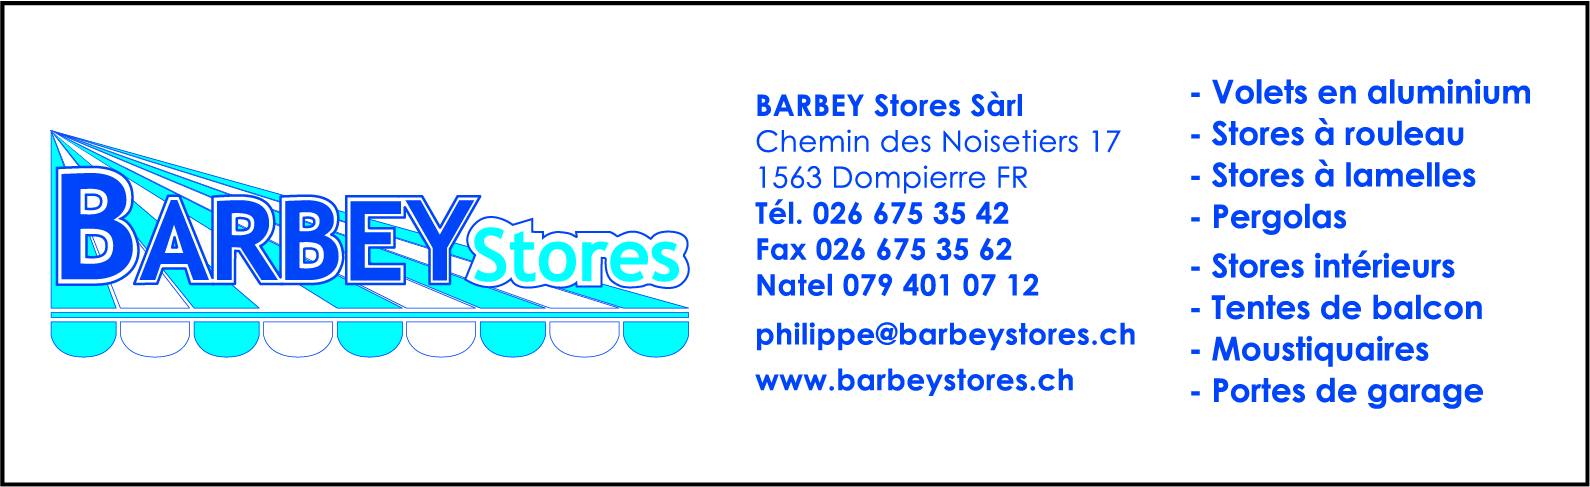 Barbey stores